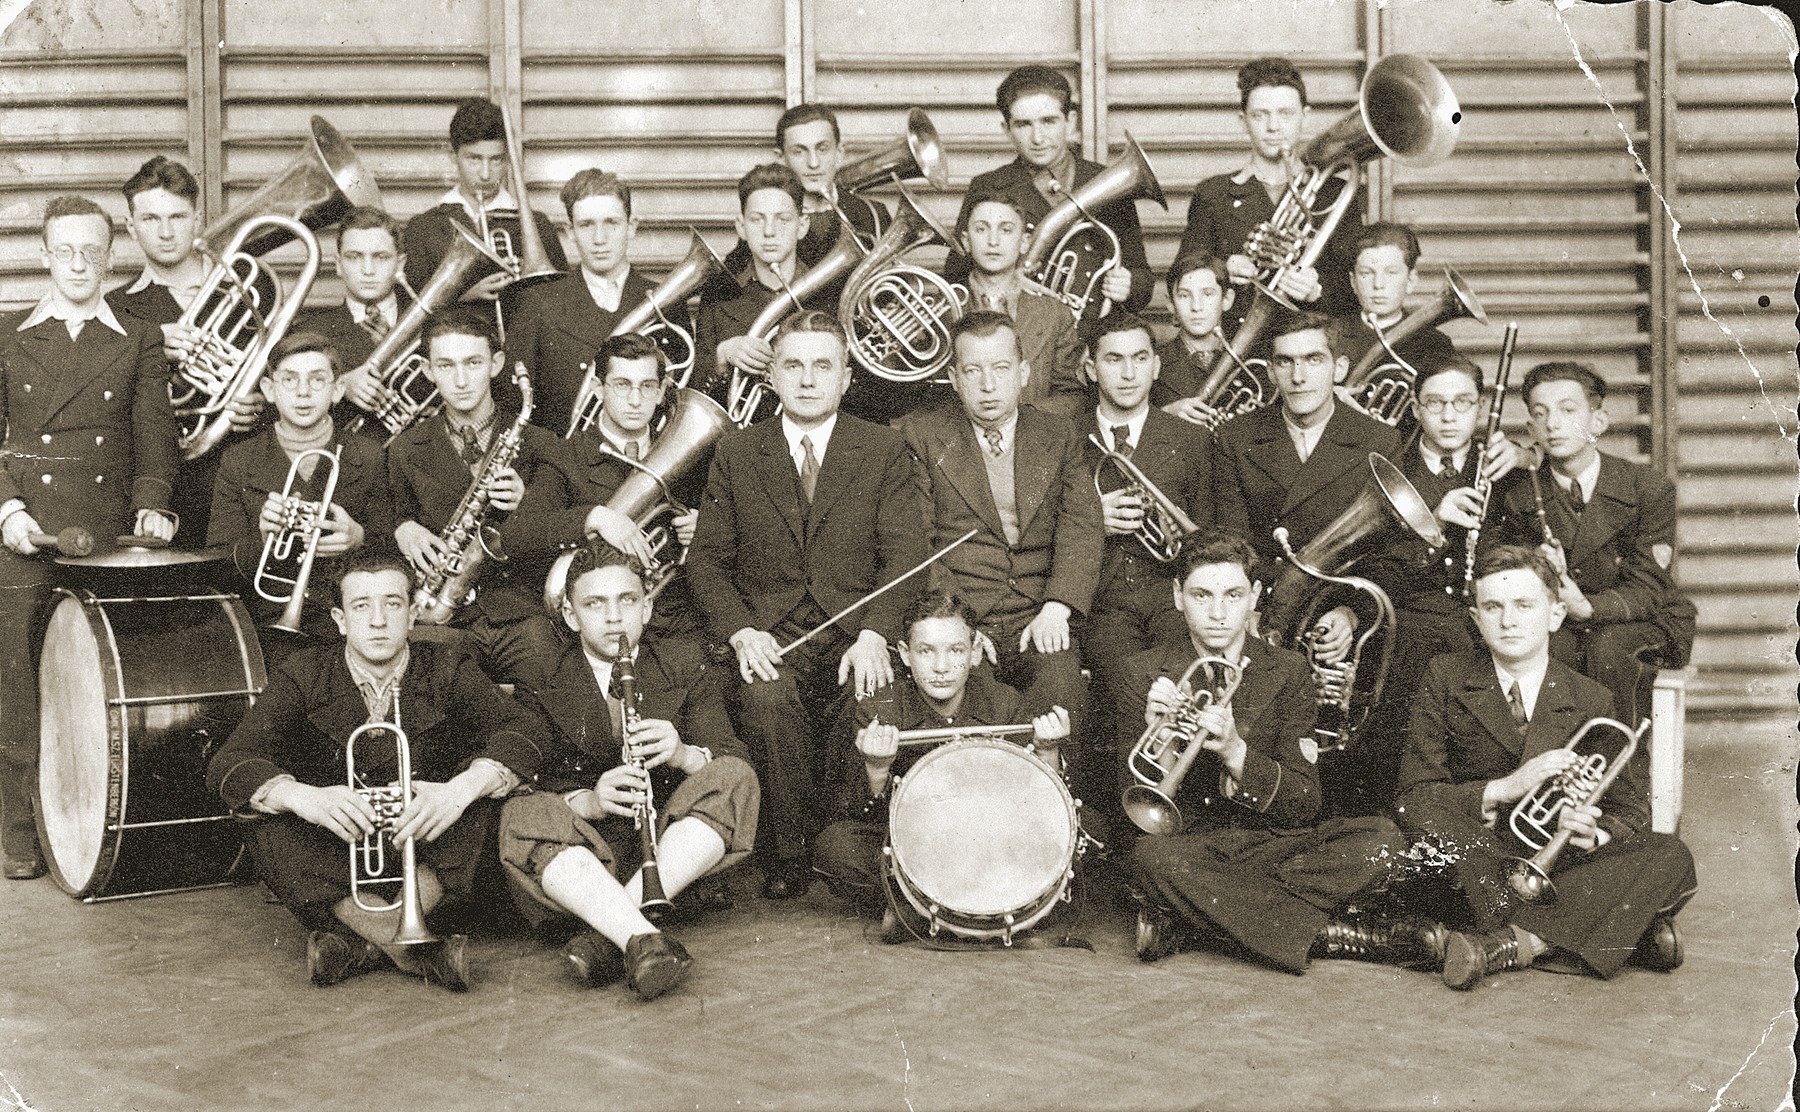 Students in the Furstenberg gymnasium band pose for a group portrait with their instruments.